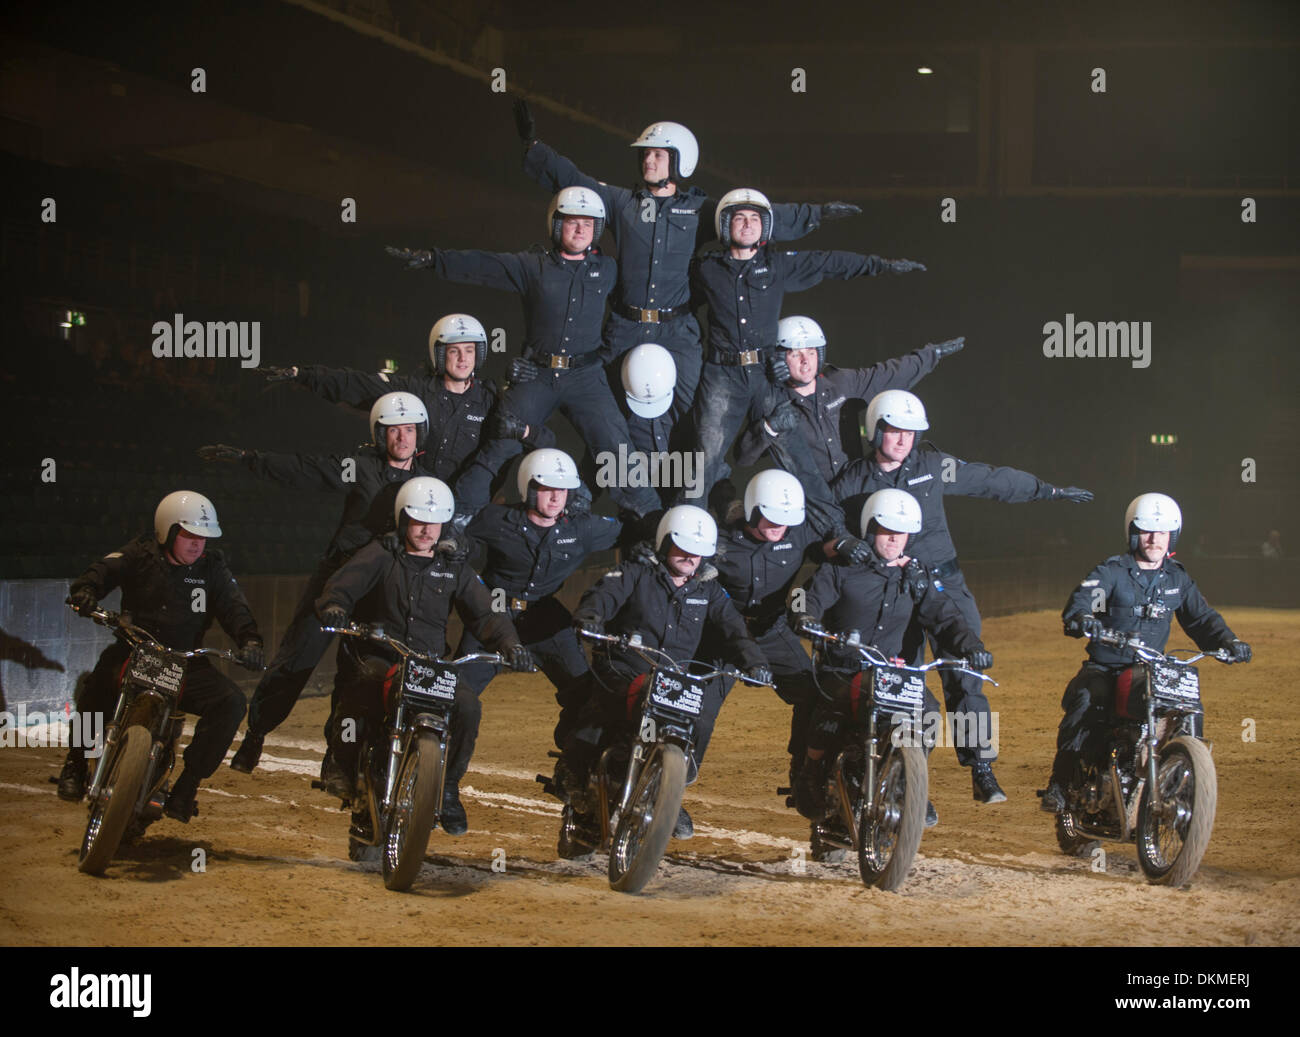 Earls Court, London UK. 6th Dec, 2013. The British Military Tournament rehearsal takes place, one of the largest displays of military theatre in the world. The Royal Signals’ White Helmets team form a human pyramid on motorcycles. The tournament raises much needed funds to support the brave men and women of the British Armed Forces as well as their families. Credit:  Malcolm Park editorial/Alamy Live News Stock Photo